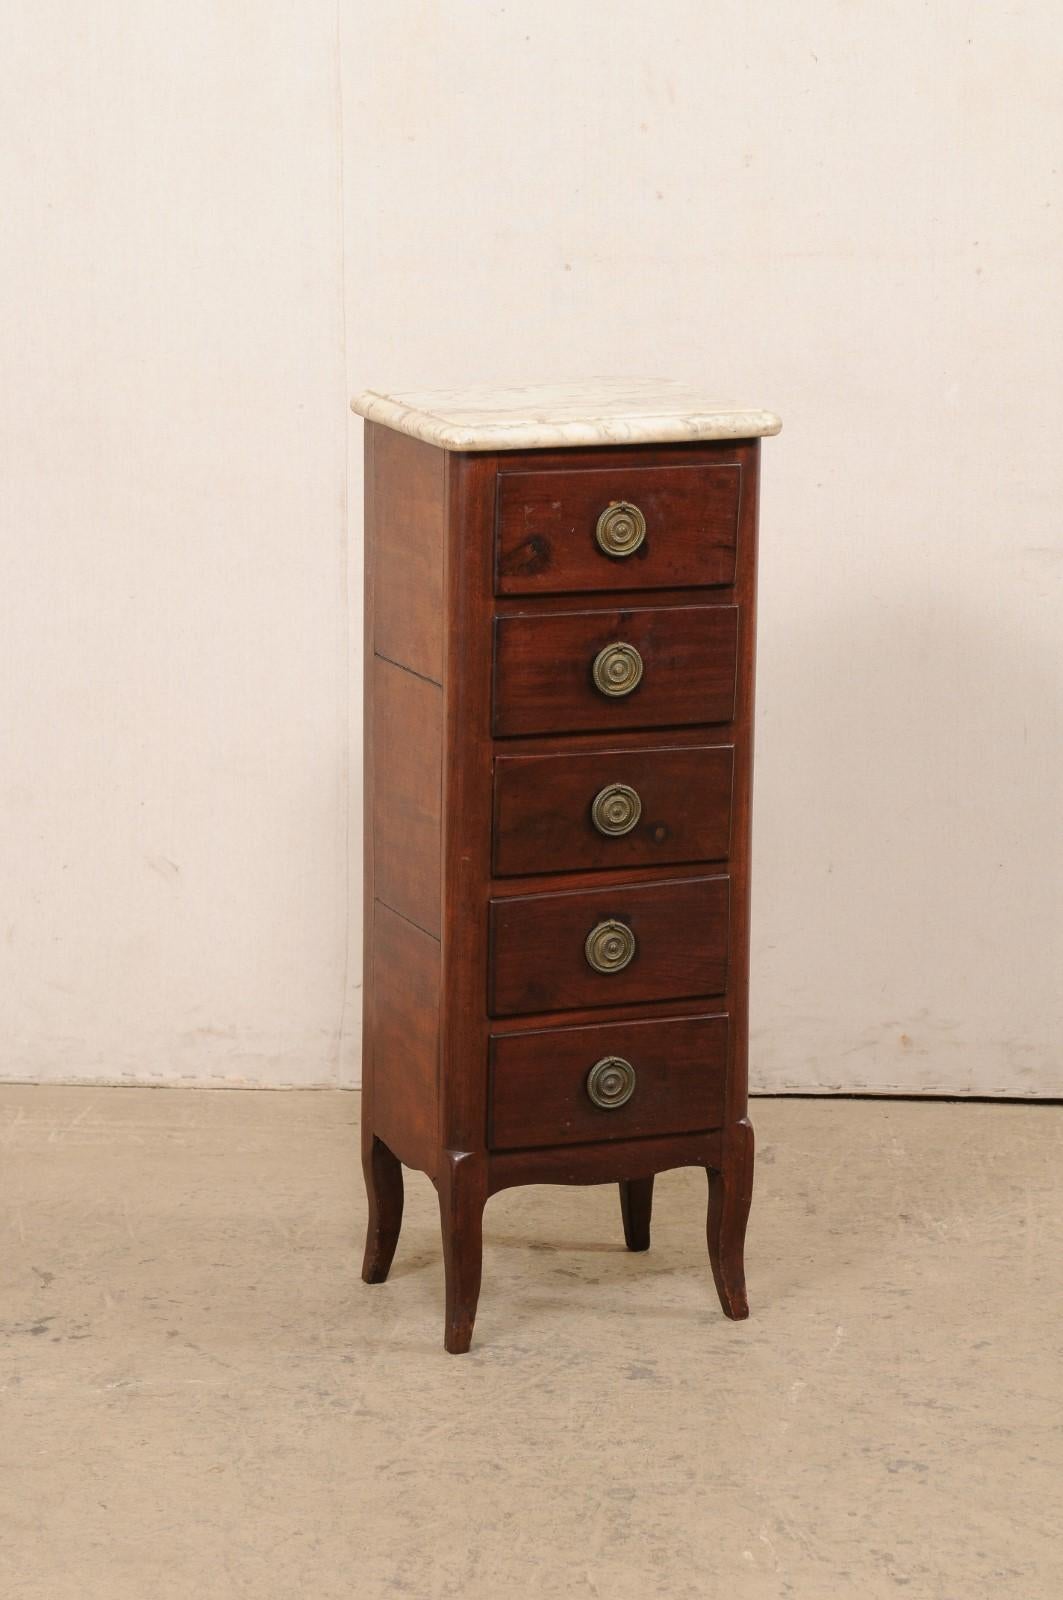 A French Louis XV style wood lingerie chest, with marble top and five drawers, from the 19th century. This antique small-sized commode from France features its original marble top, walnut wood case which houses five drawers set in vertical fashion,